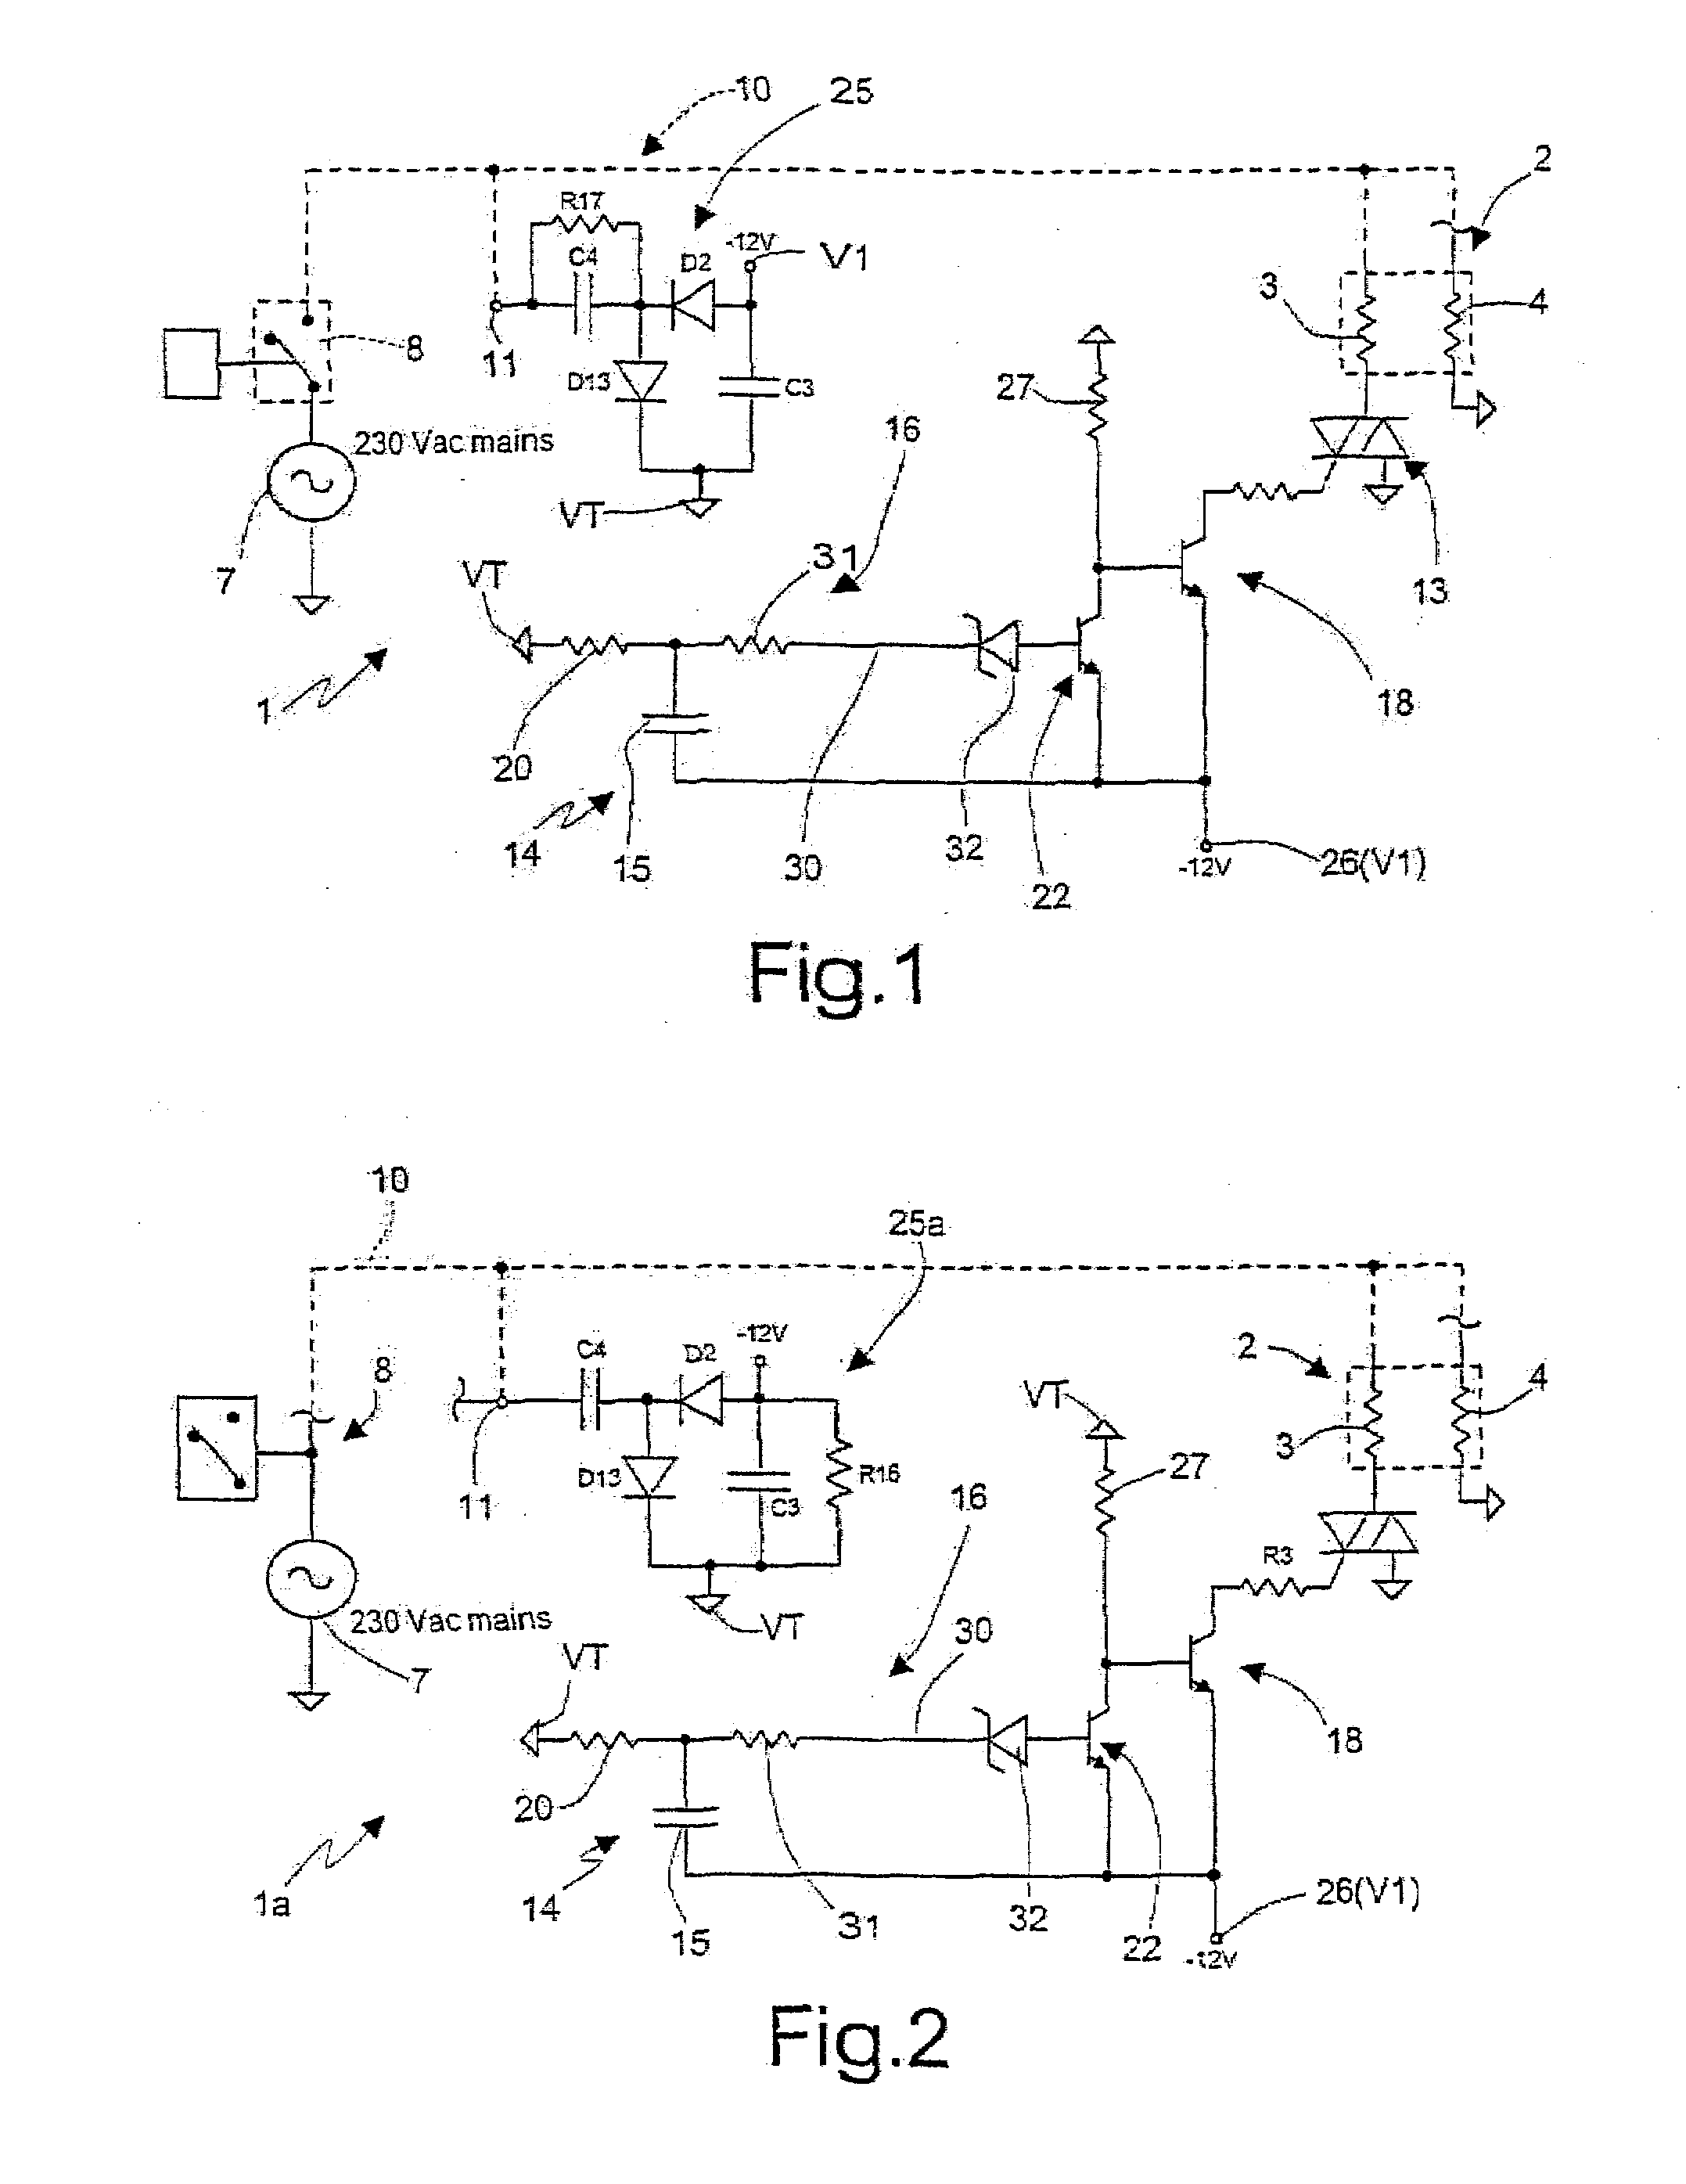 Electronic starter device for an electric motor, in particular for a compressor of a refrigerating circuit of an electric household appliance